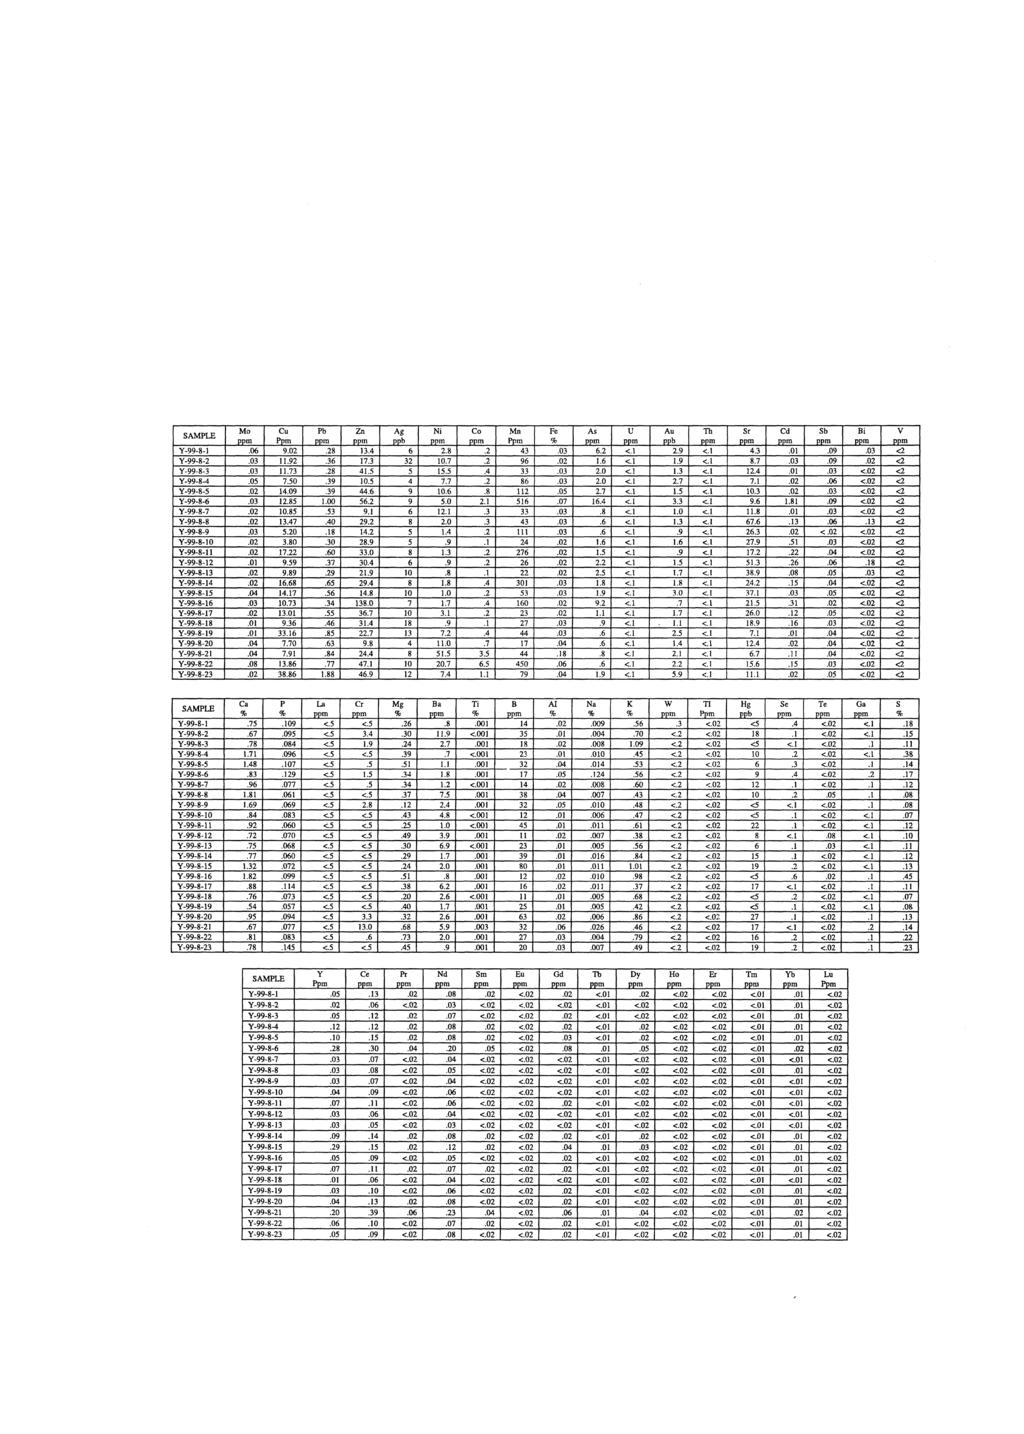 AYDAL Table 1: The chemical analyses of 23 leaf samples. The number of the tree species is shown in brackets next to them and the last number is the representative sample of the non-mineralised area.